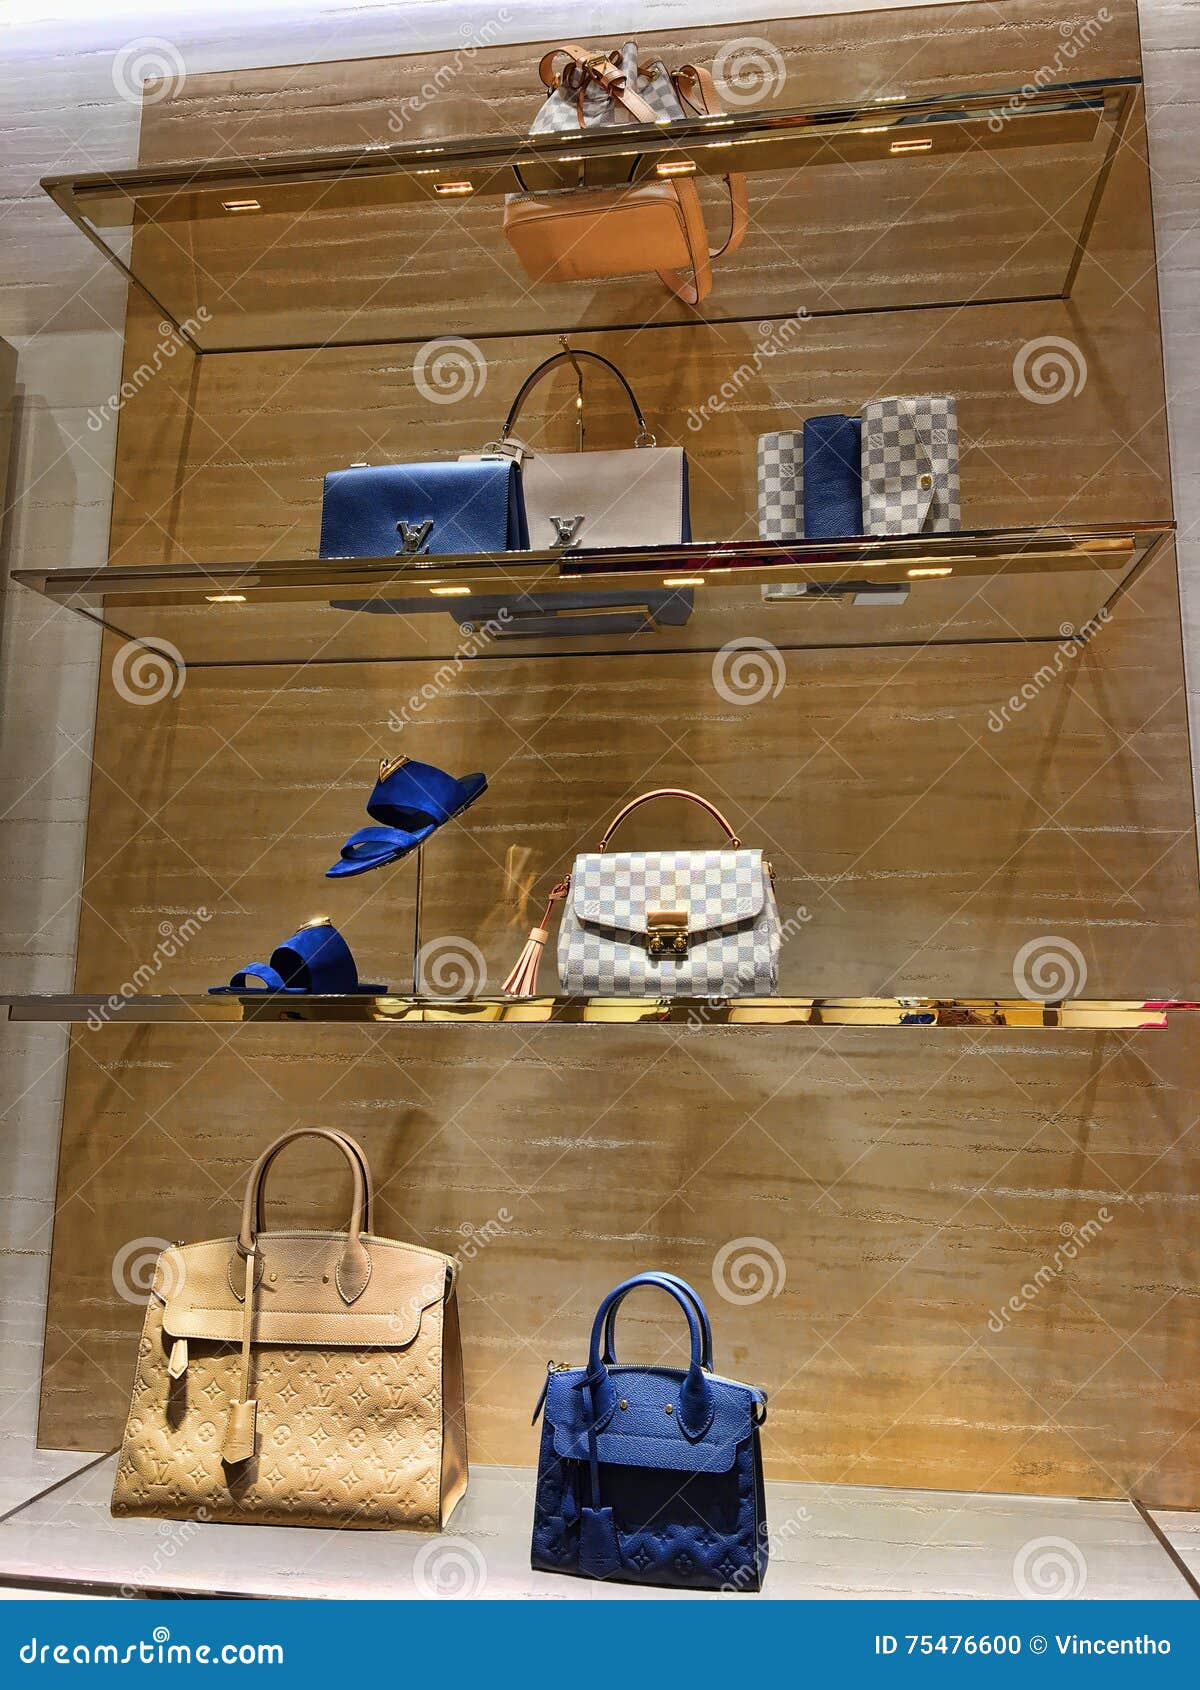 Louis Vuitton Accessories Display Editorial Image - Image of fashion,  vuitton: 75476600